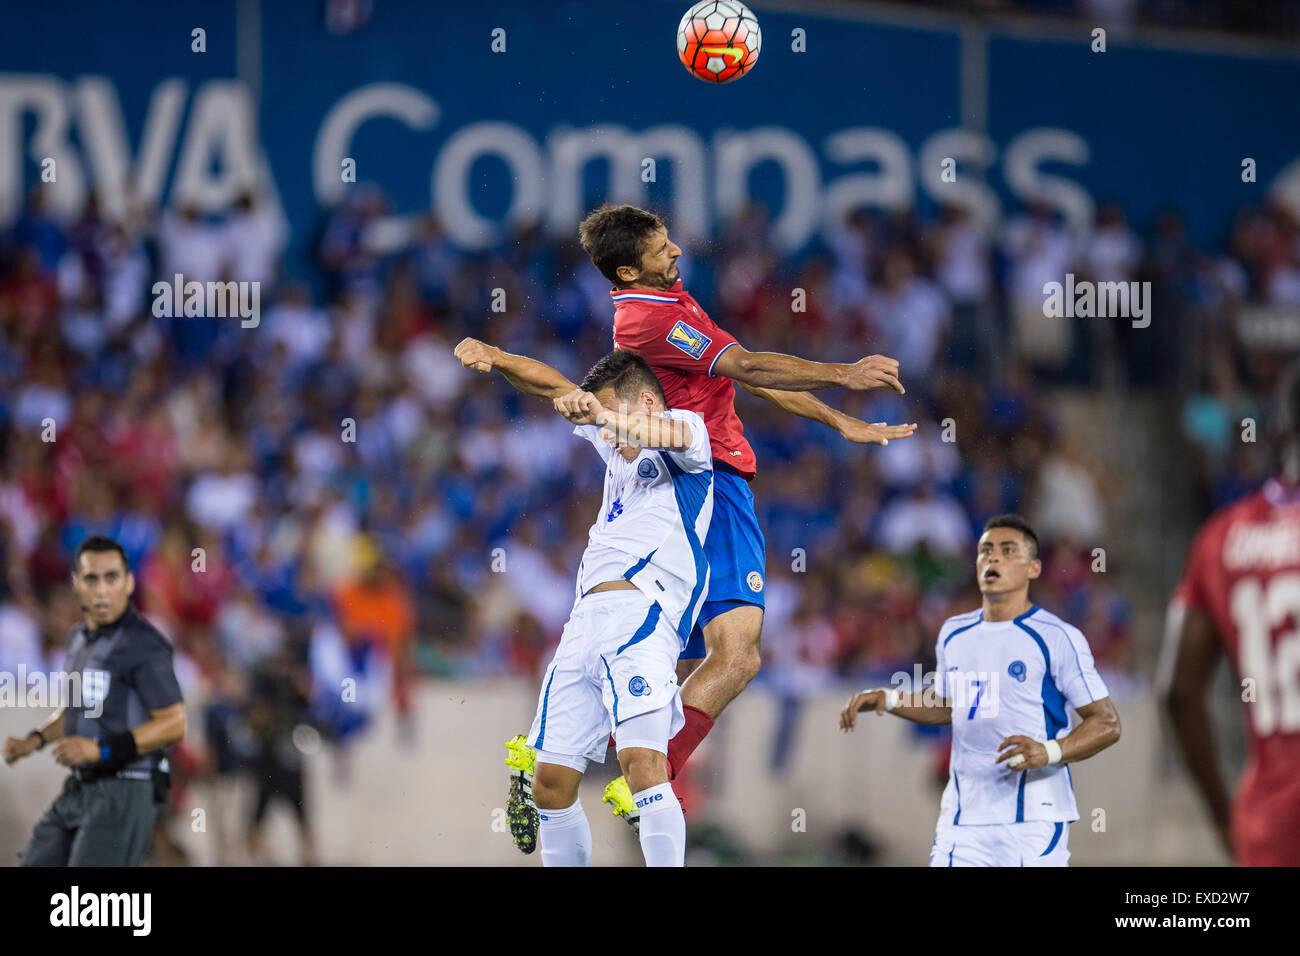 July 11, 2015: Costa Rica midfielder Celso Borges (5) and El Salvador midfielder Richard Menjivar (6) battle for a header during the 1st half of an international CONCACAF Gold Cup soccer match between Costa Rica and El Salvador at BBVA Compass Stadium in Houston, TX. The game ended in a 1-1 draw. Credit:  Cal Sport Media/Alamy Live News Stock Photo